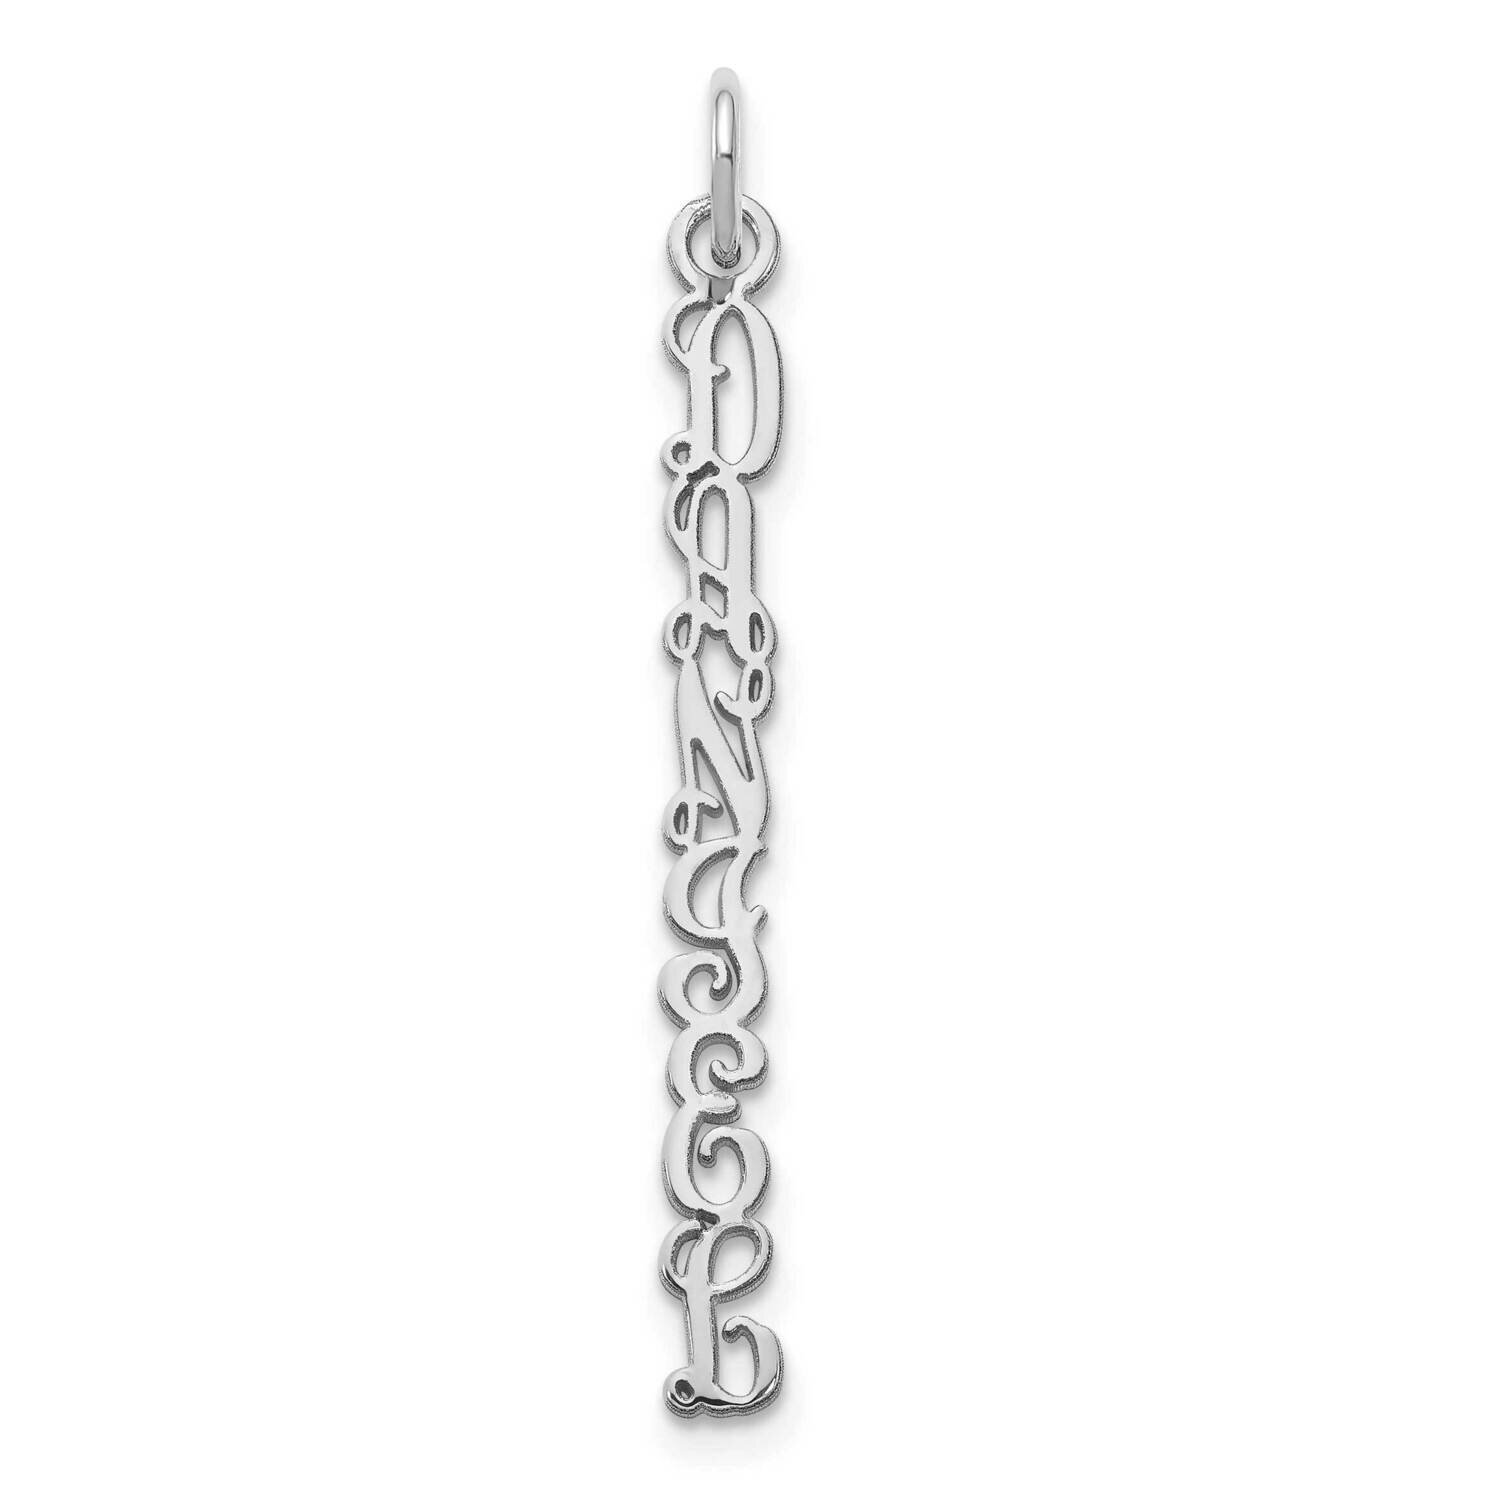 Qg Vine Font Vertical Name Plate Charm Sterling Silver Rhodium-plated XNA1175SS